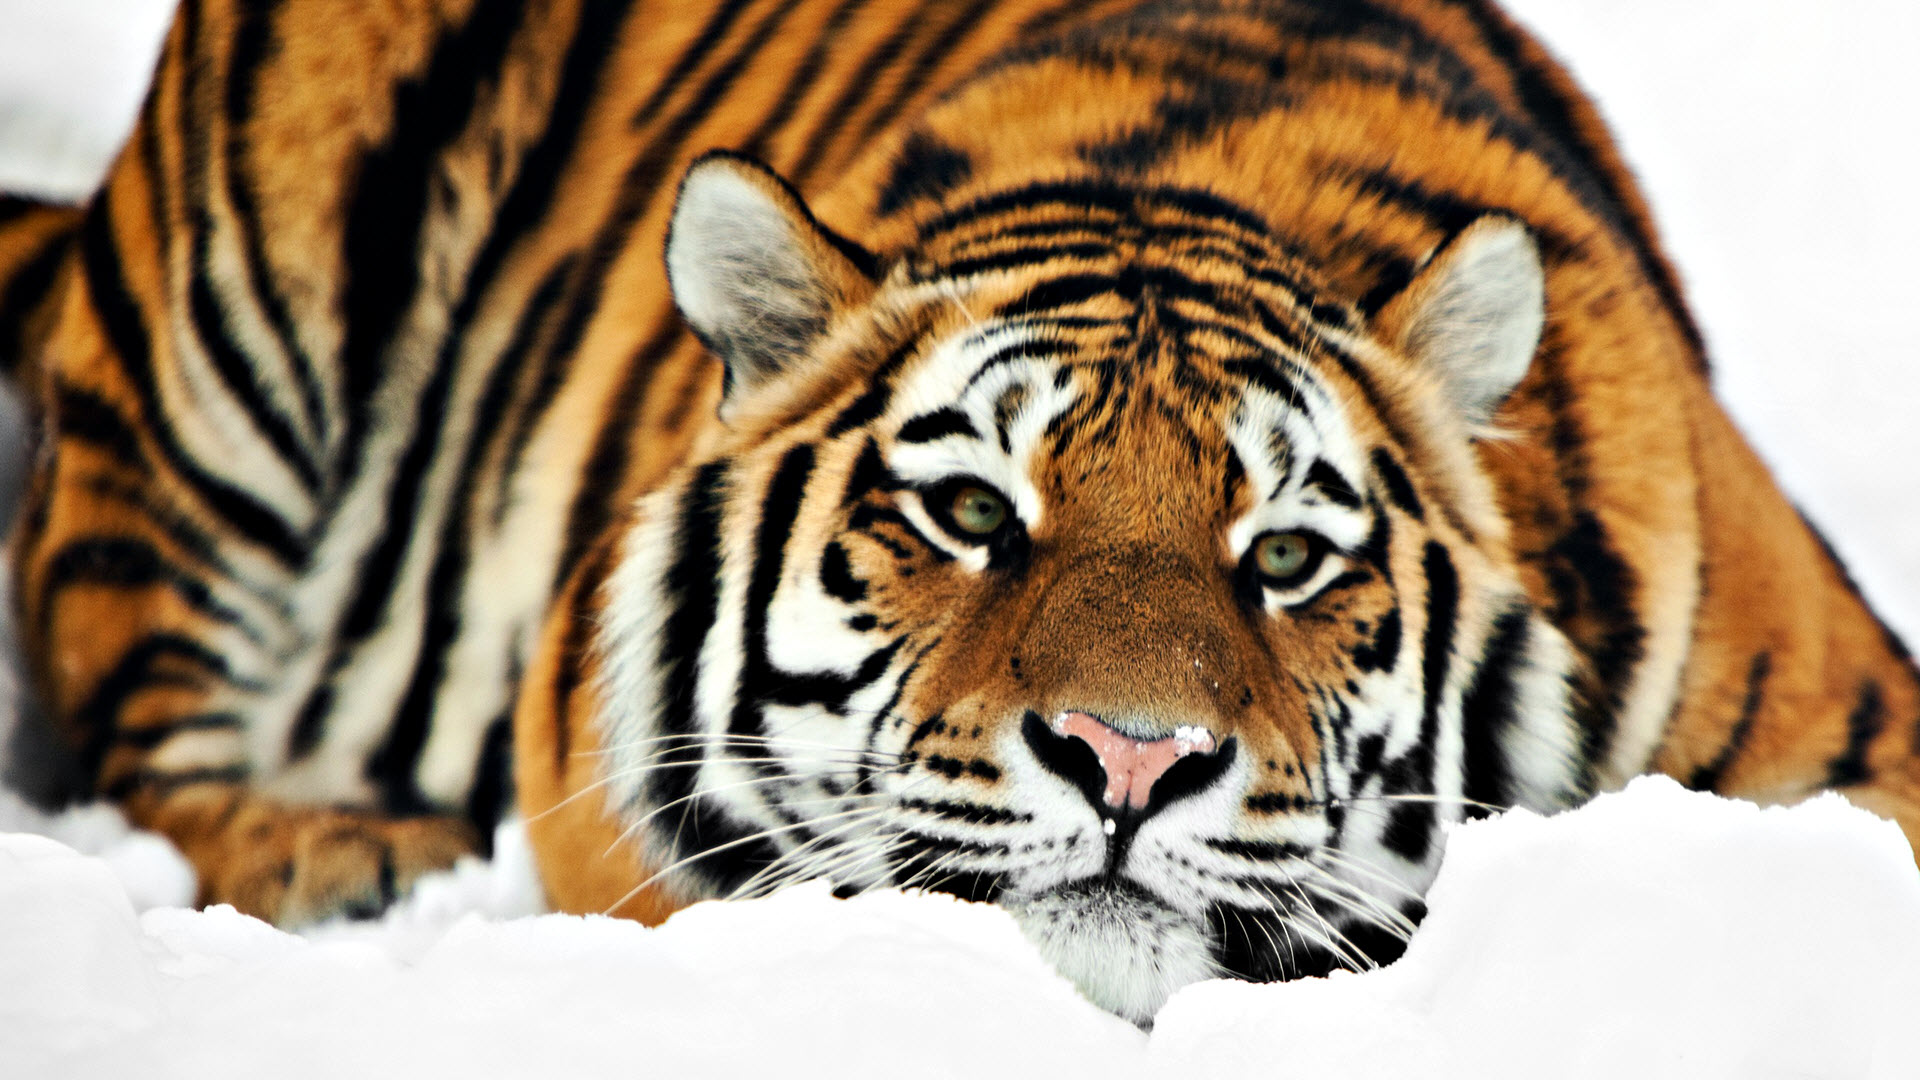 Tiger HD 1080p Wallpapers HD Wallpapers 1920x1080